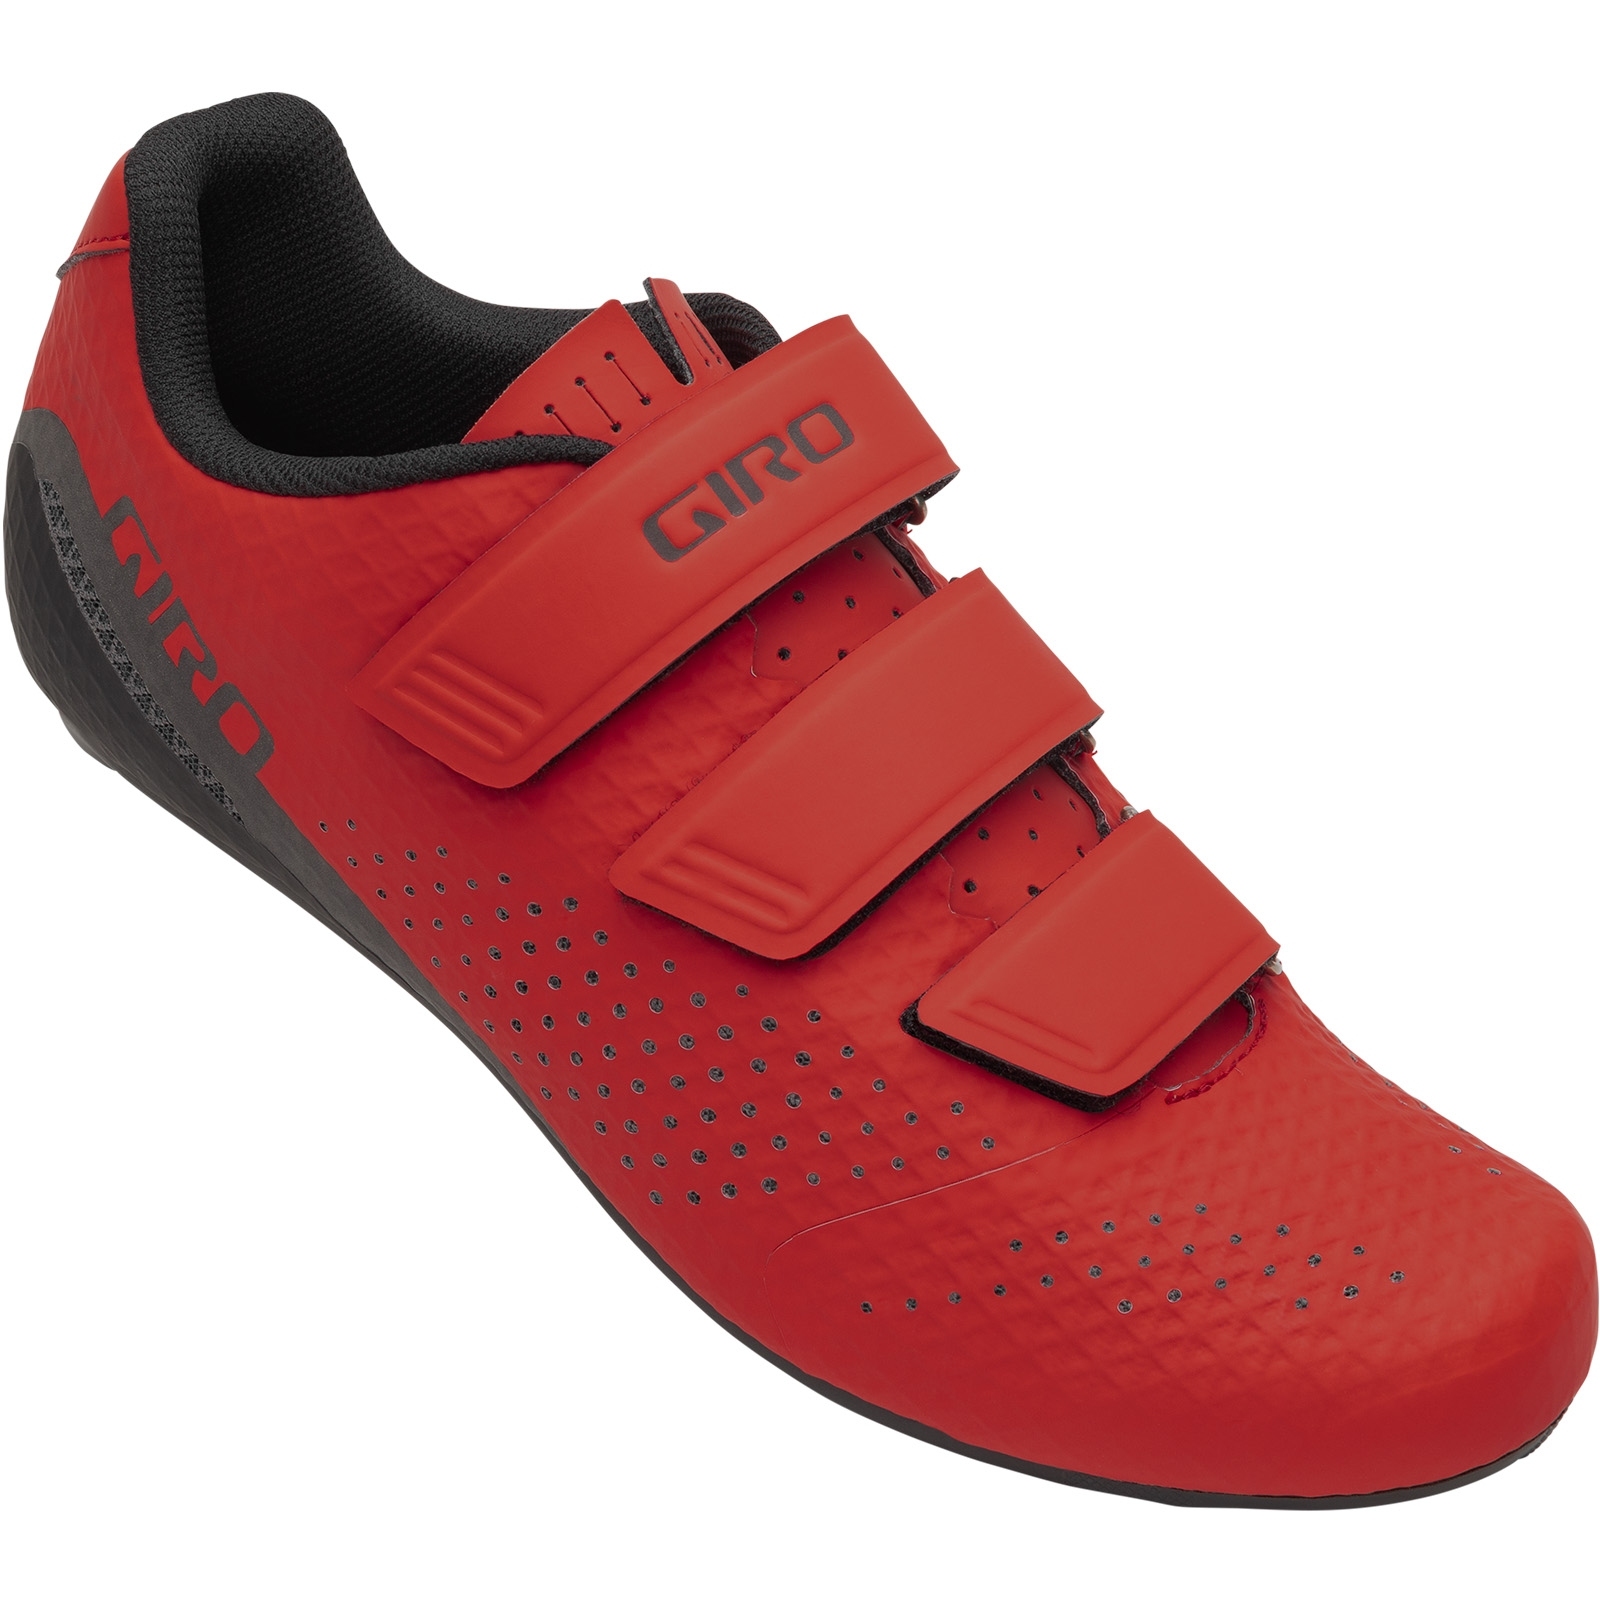 Picture of Giro Stylus Road Shoes - bright red